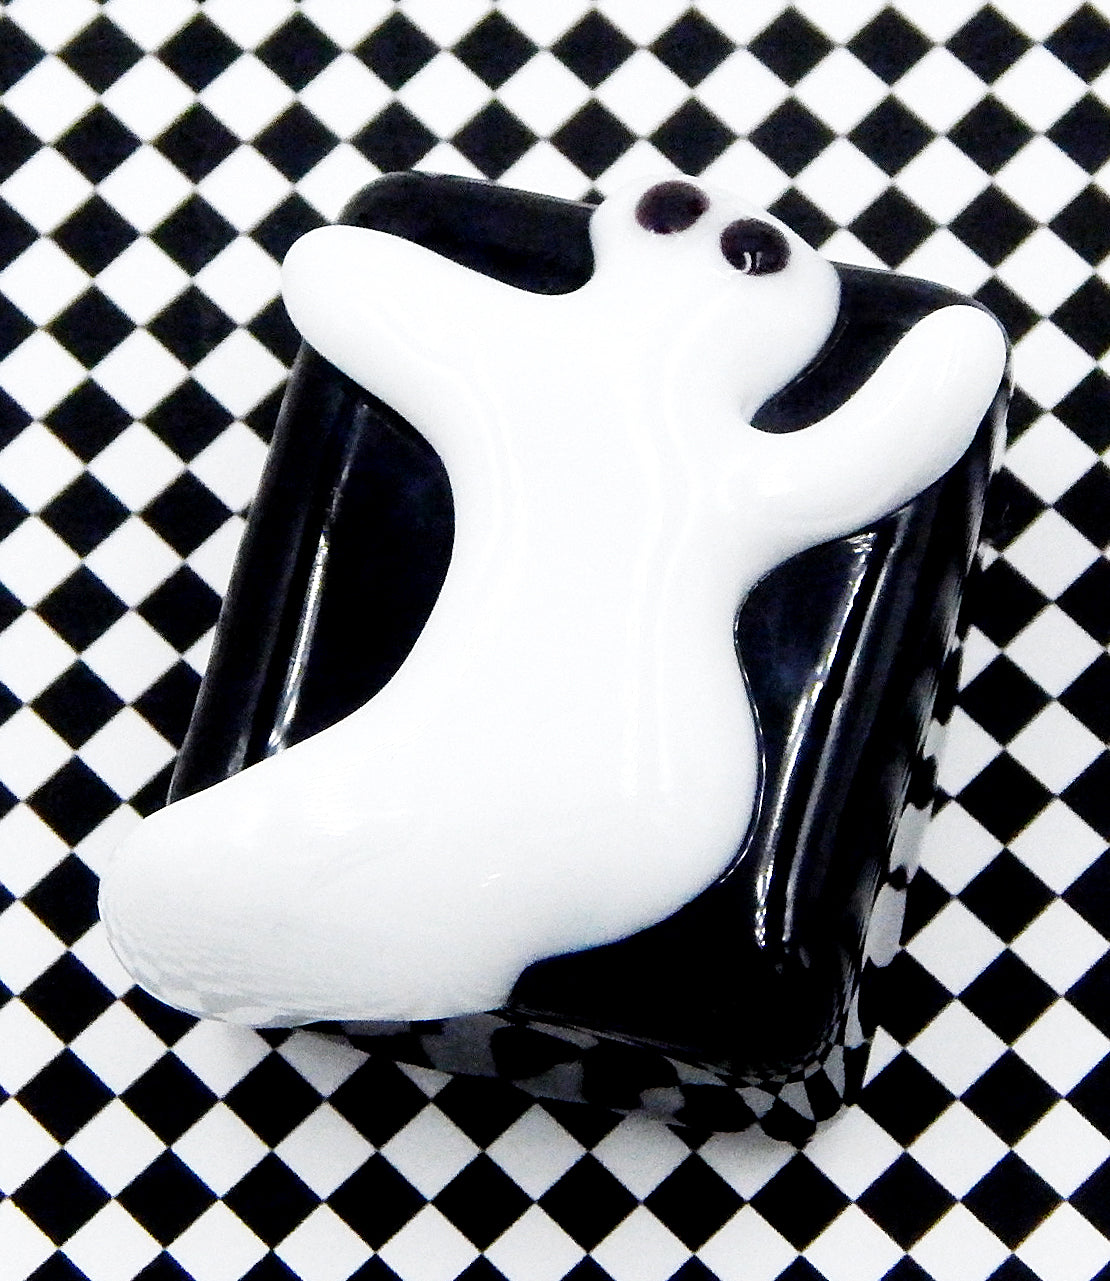 Licorice Chocolate with Spooky White Ghost (25-058KW)